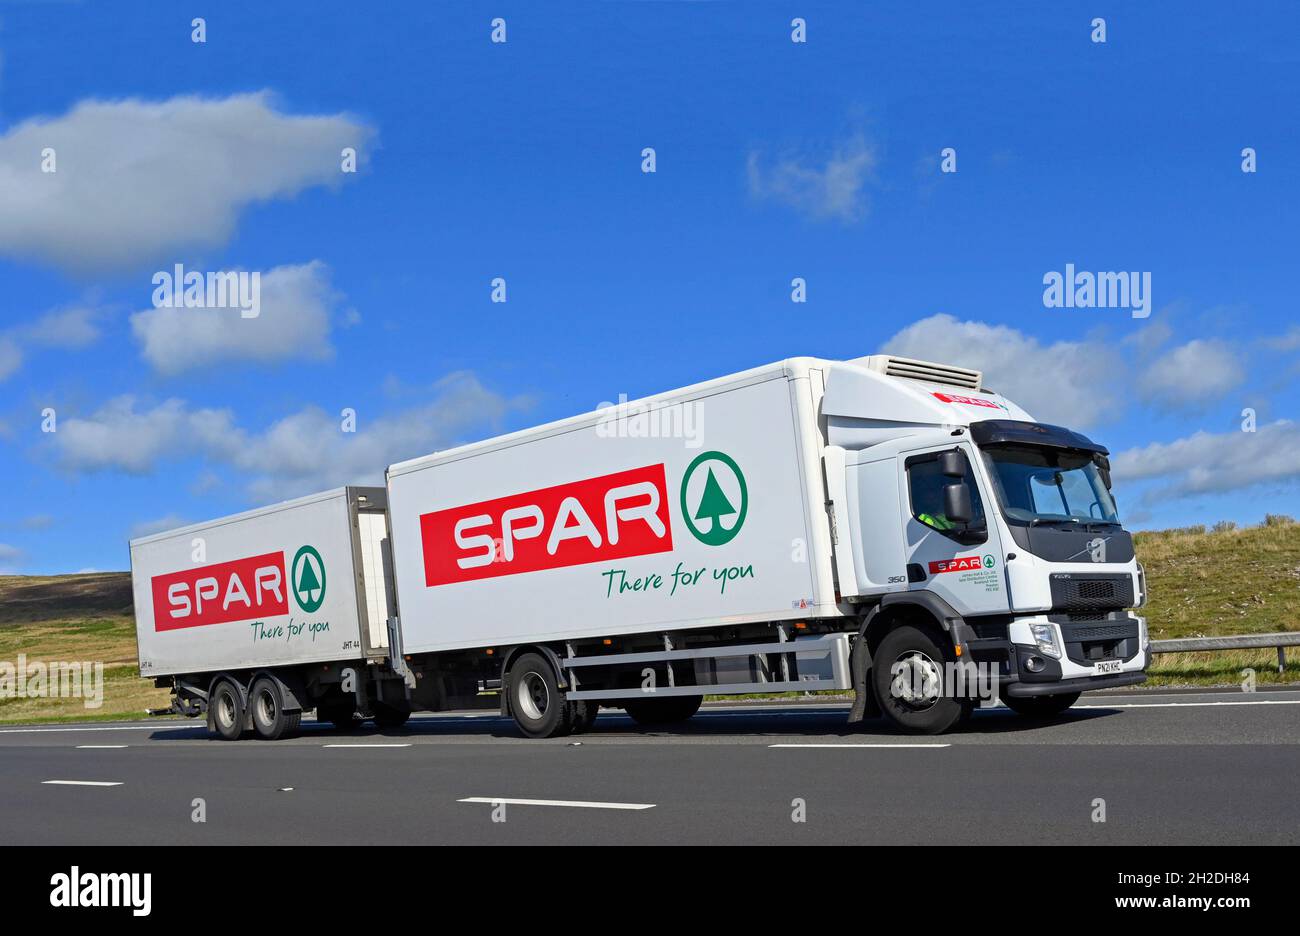 HGV with Trailer.  SPAR, There for you. M6 Motorway, Southbound. Shap, Cumbria, England, United Kingdom, Europe. Stock Photo